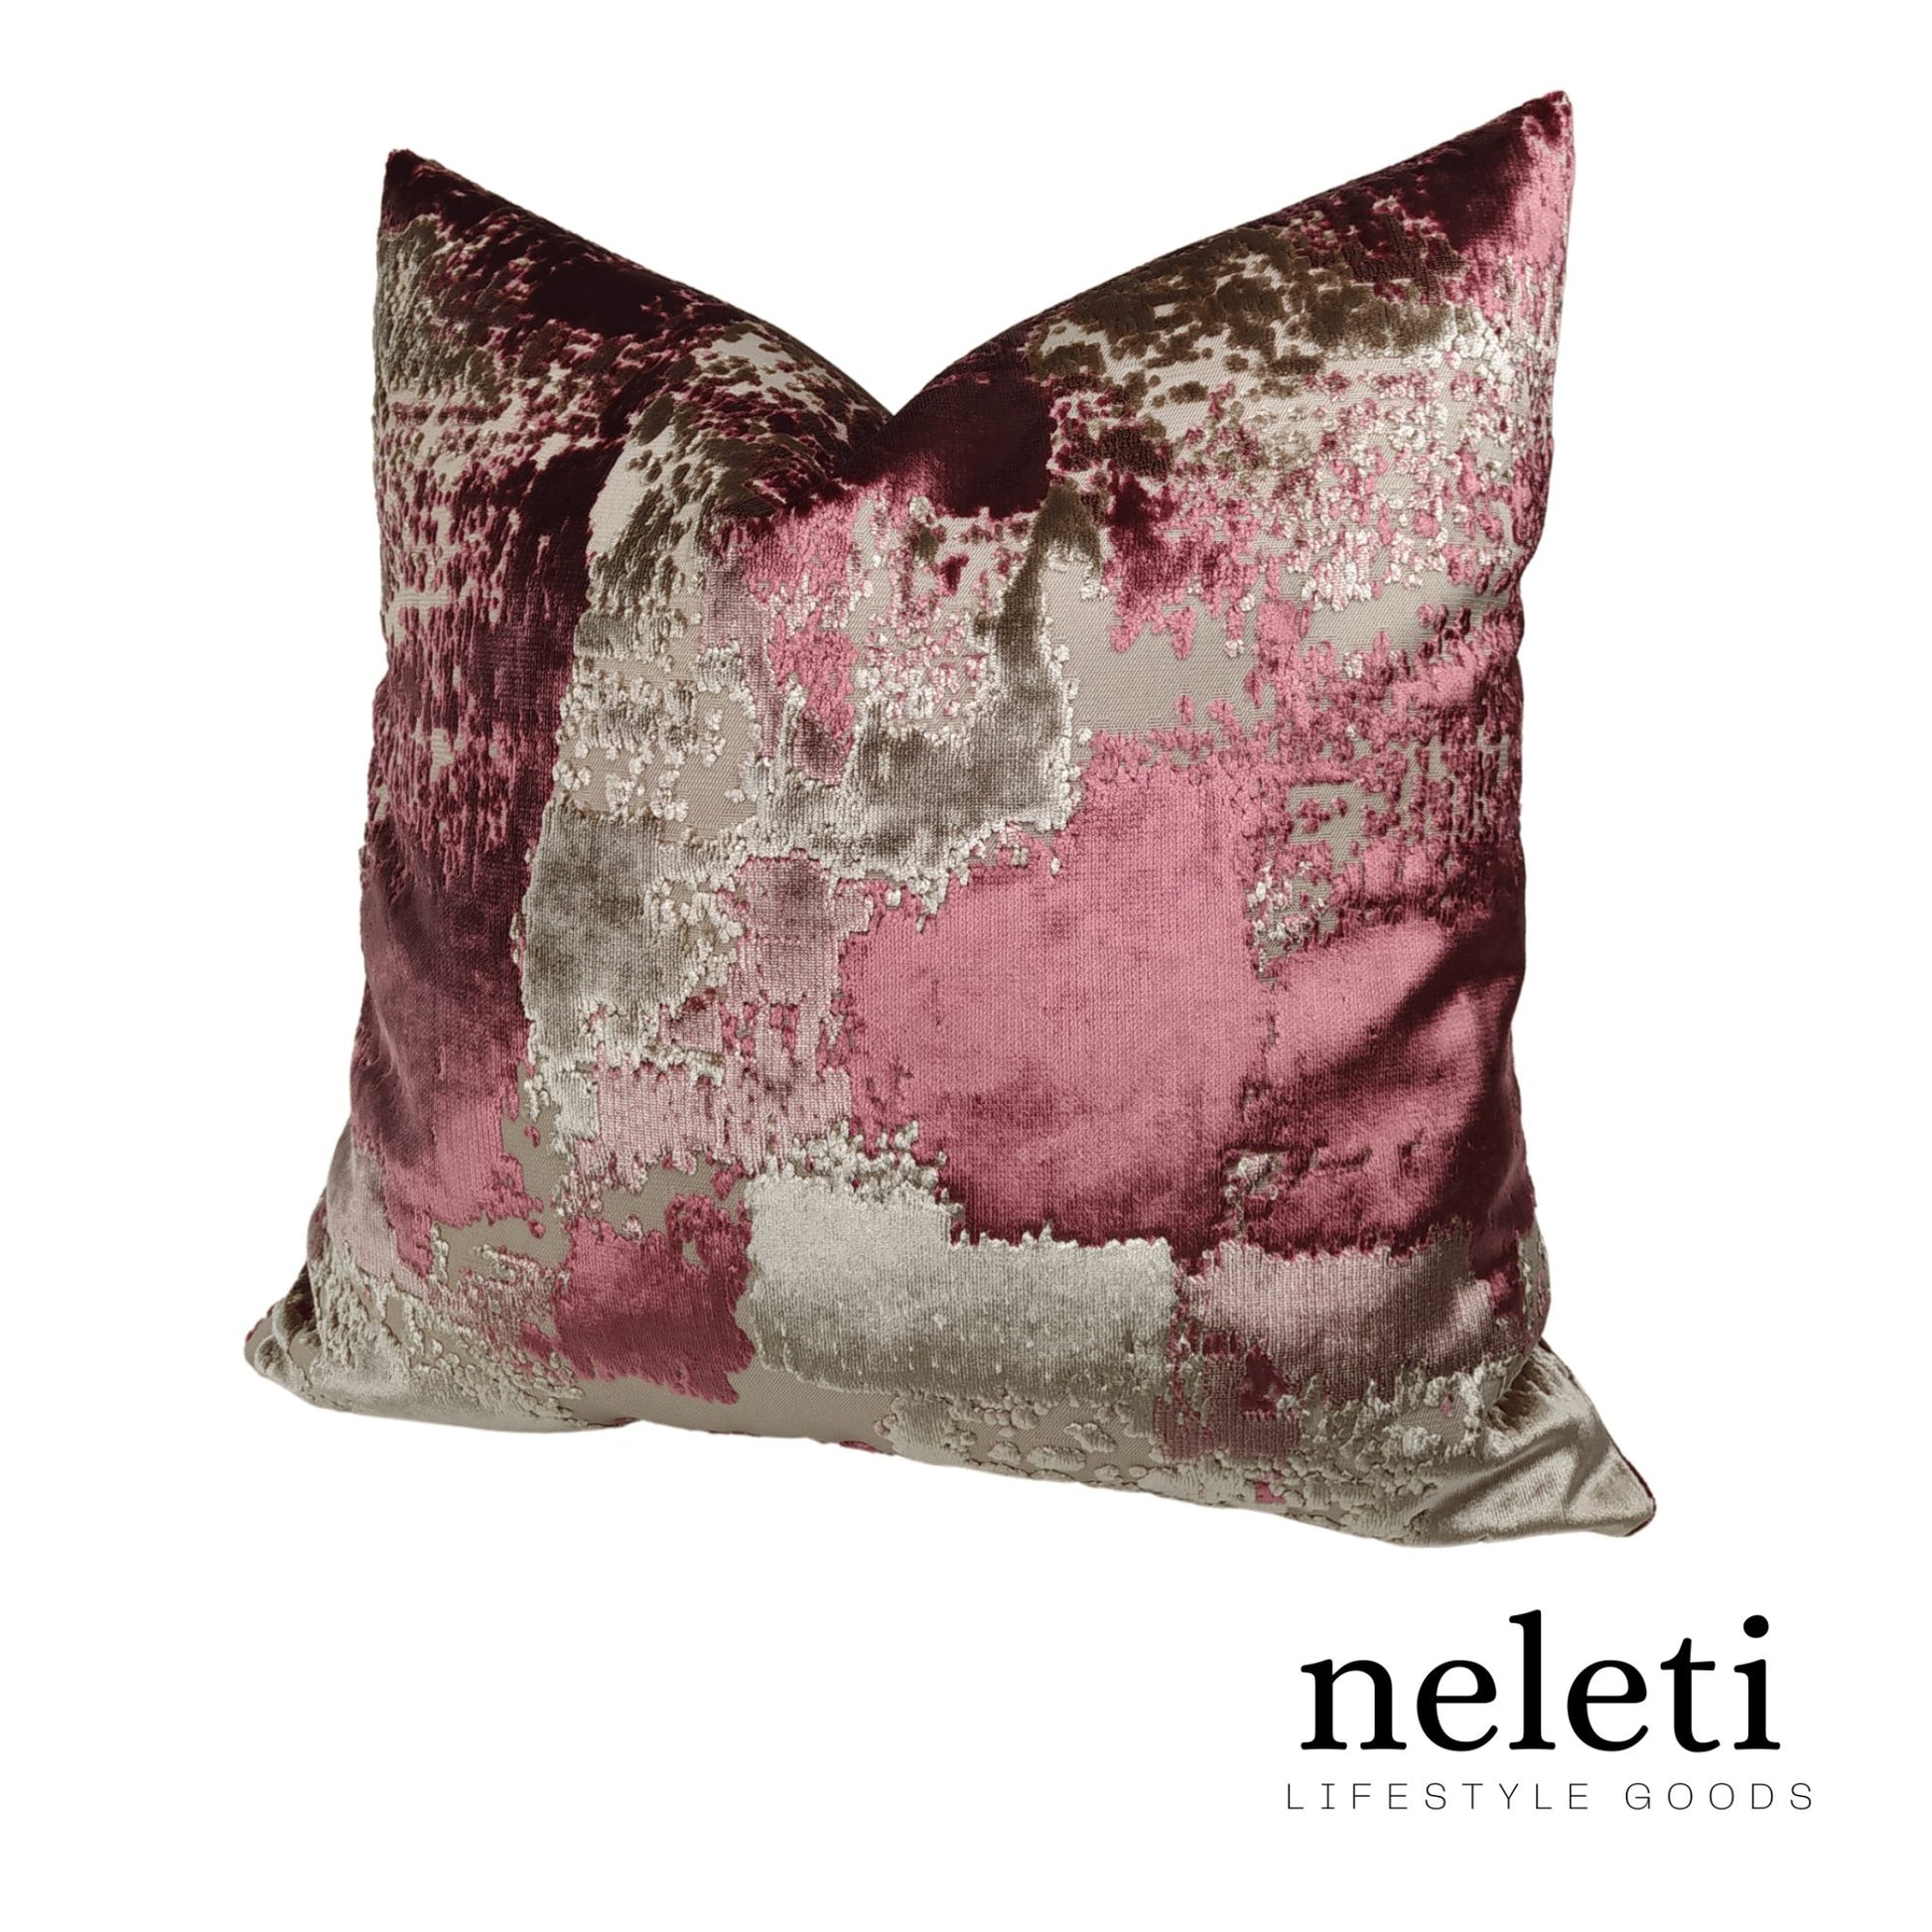 neleti.com-pink-gold-accent-pillow-covers